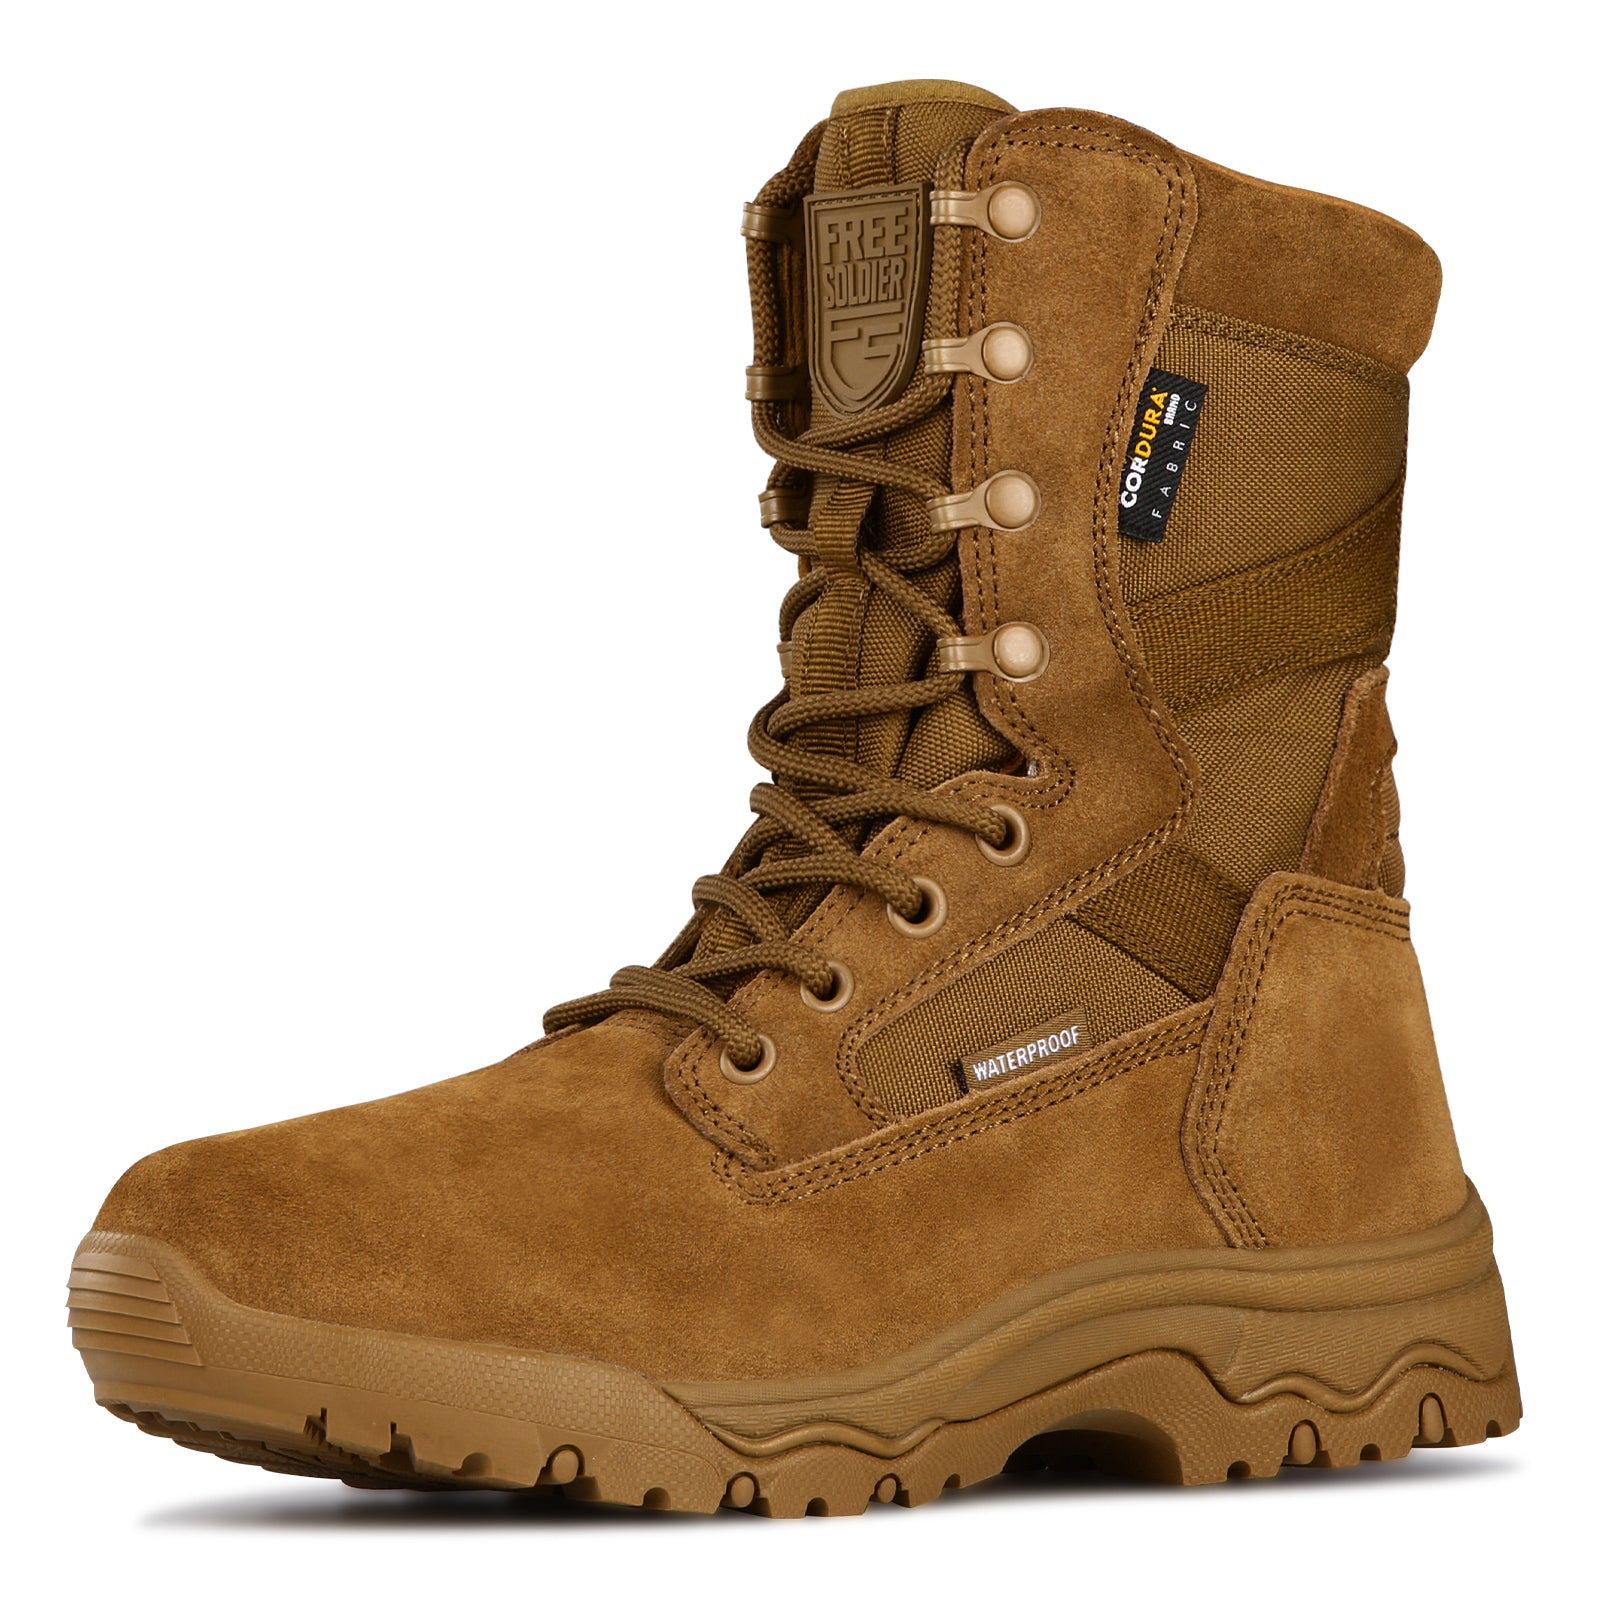 6 inch Military Work Boots, Durable Work Boot Styles